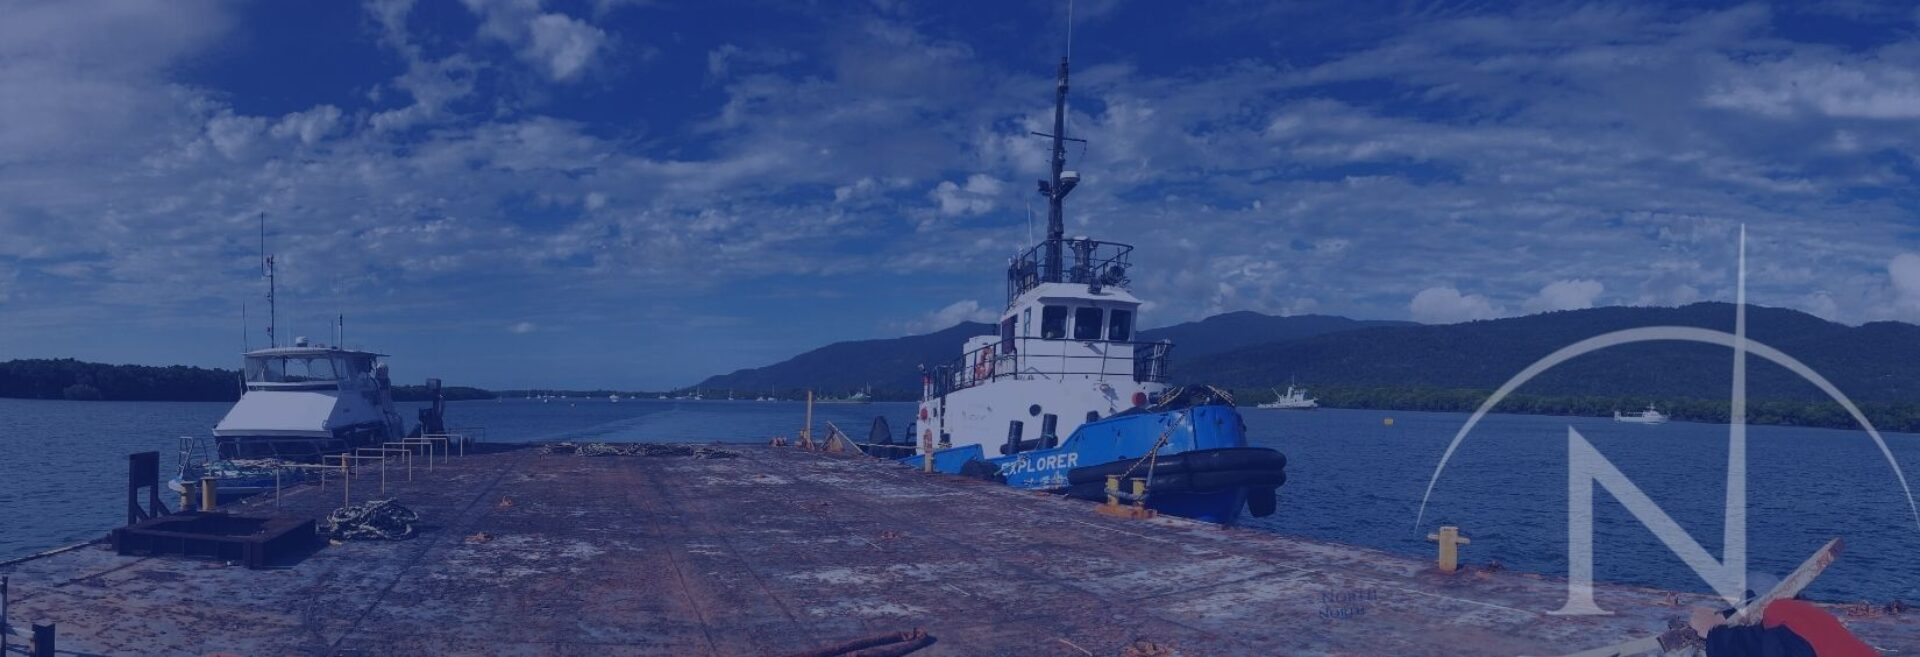 Home of North Marine · Tugboat Charter Company in Cairns Port, Australia